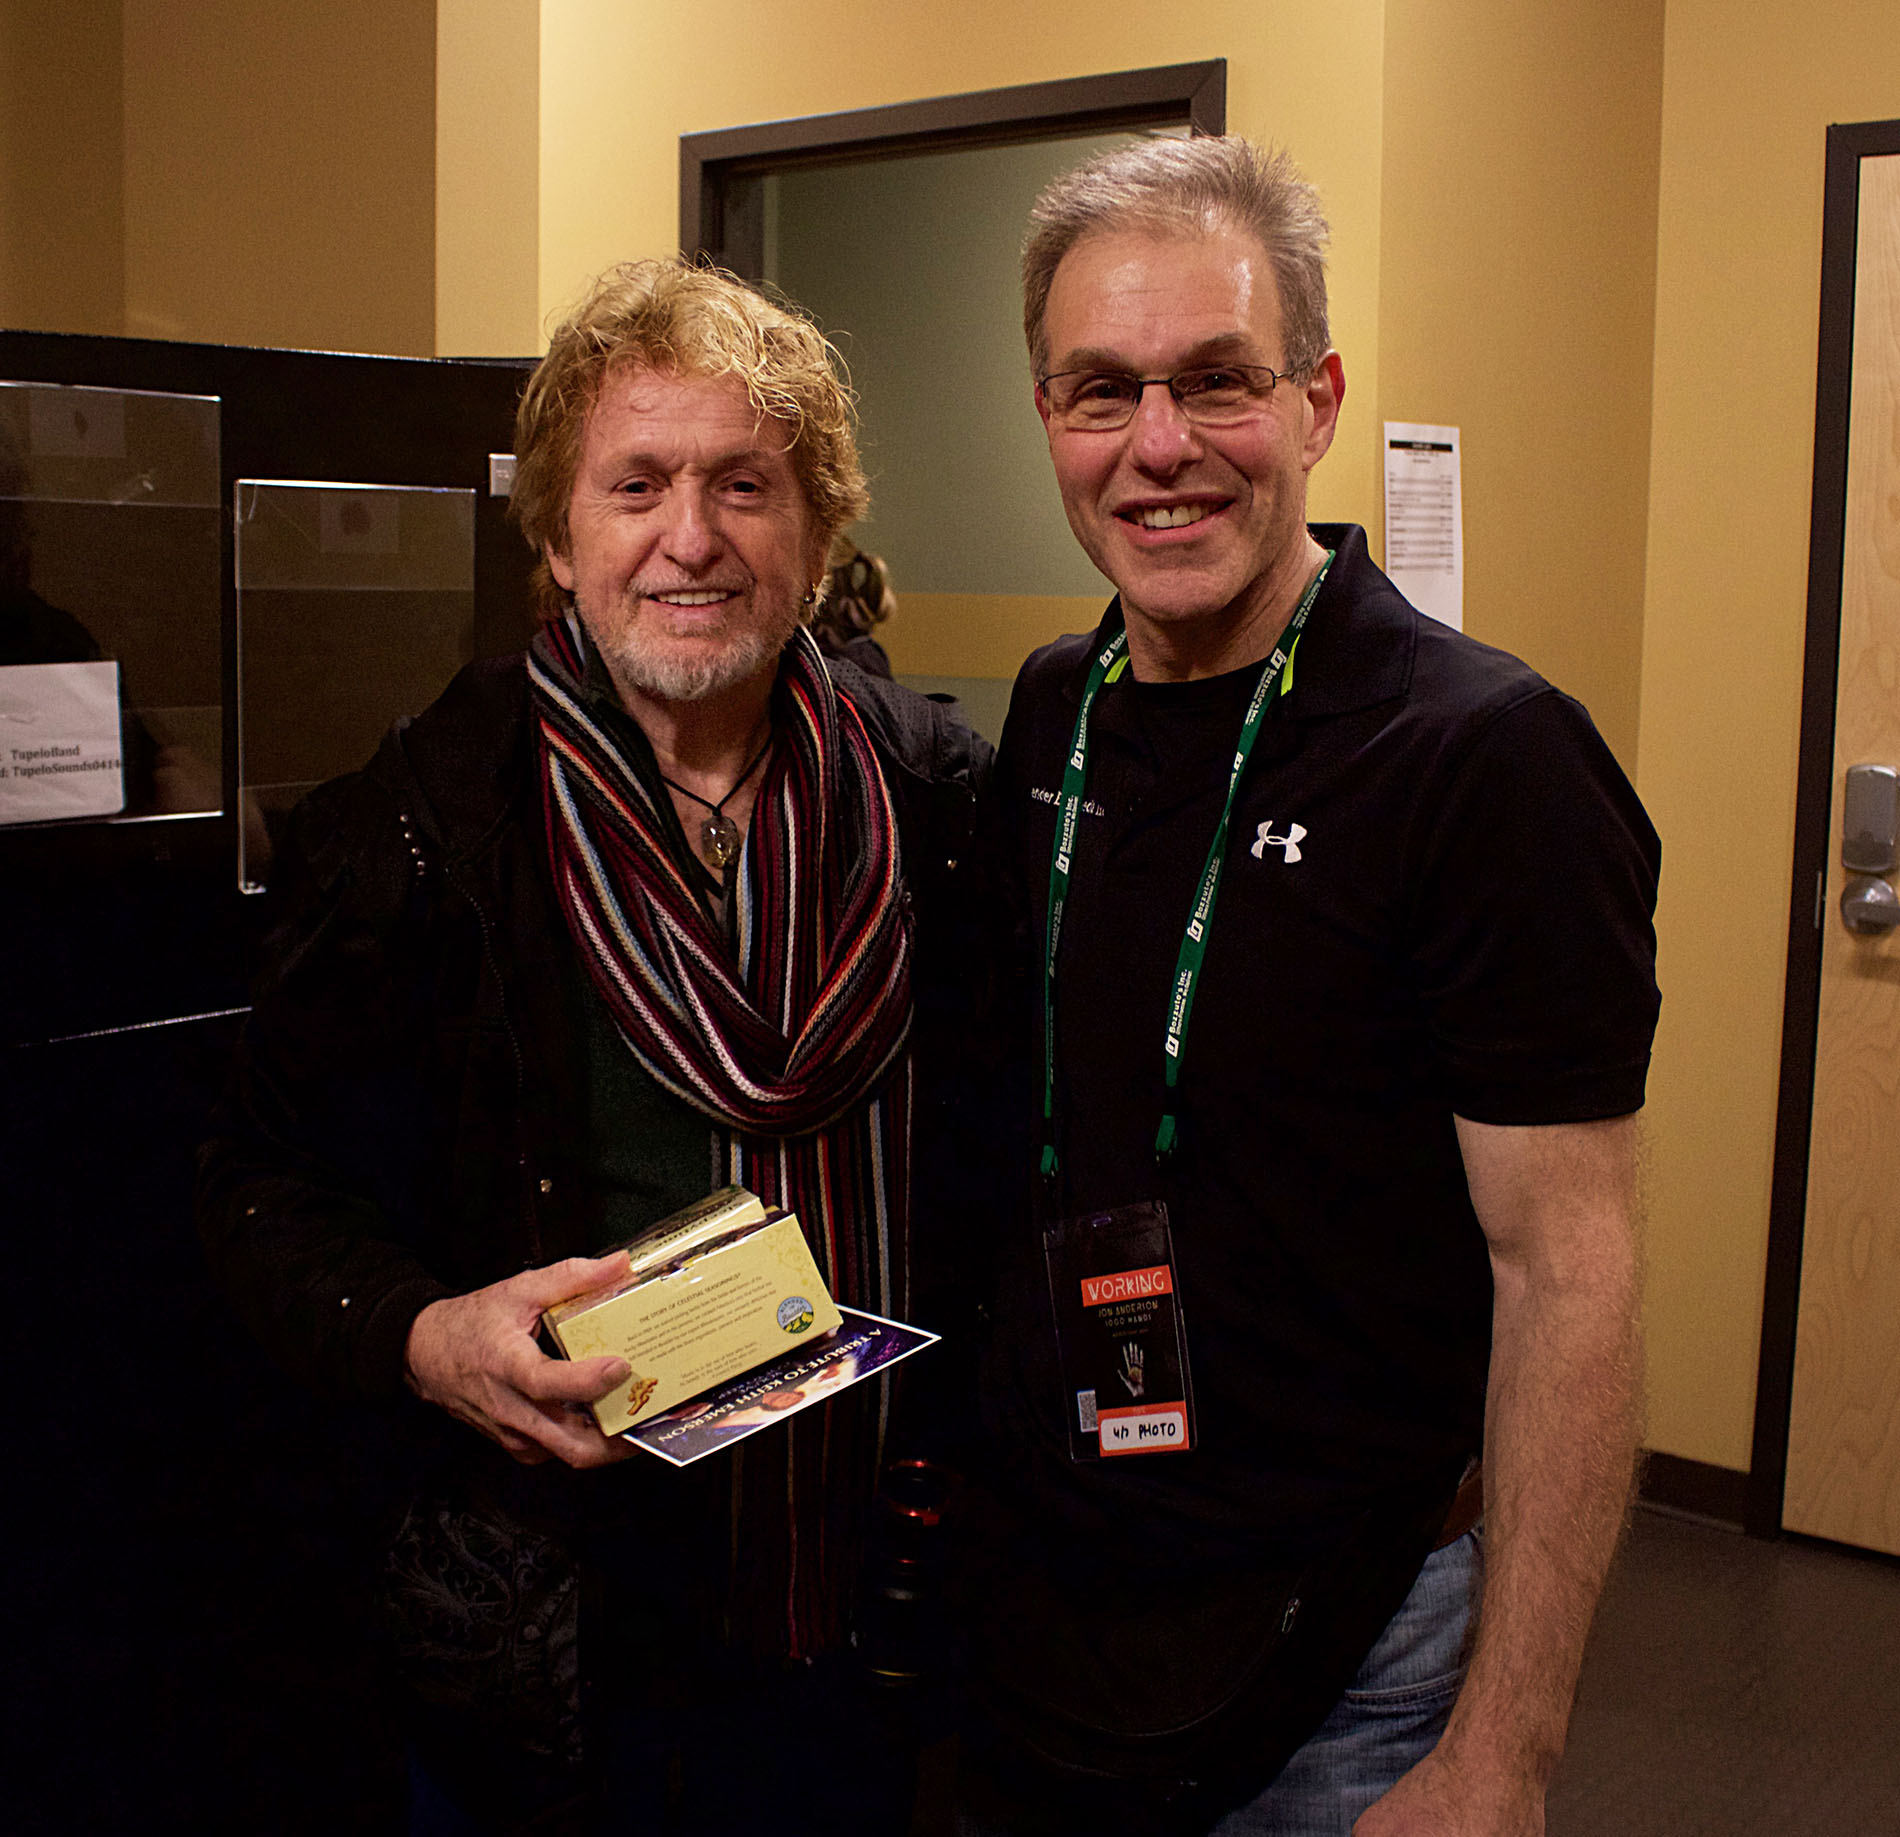 Jon Anderson and Elliot Gould at the Tupelo Music Hall, April 7, 2019